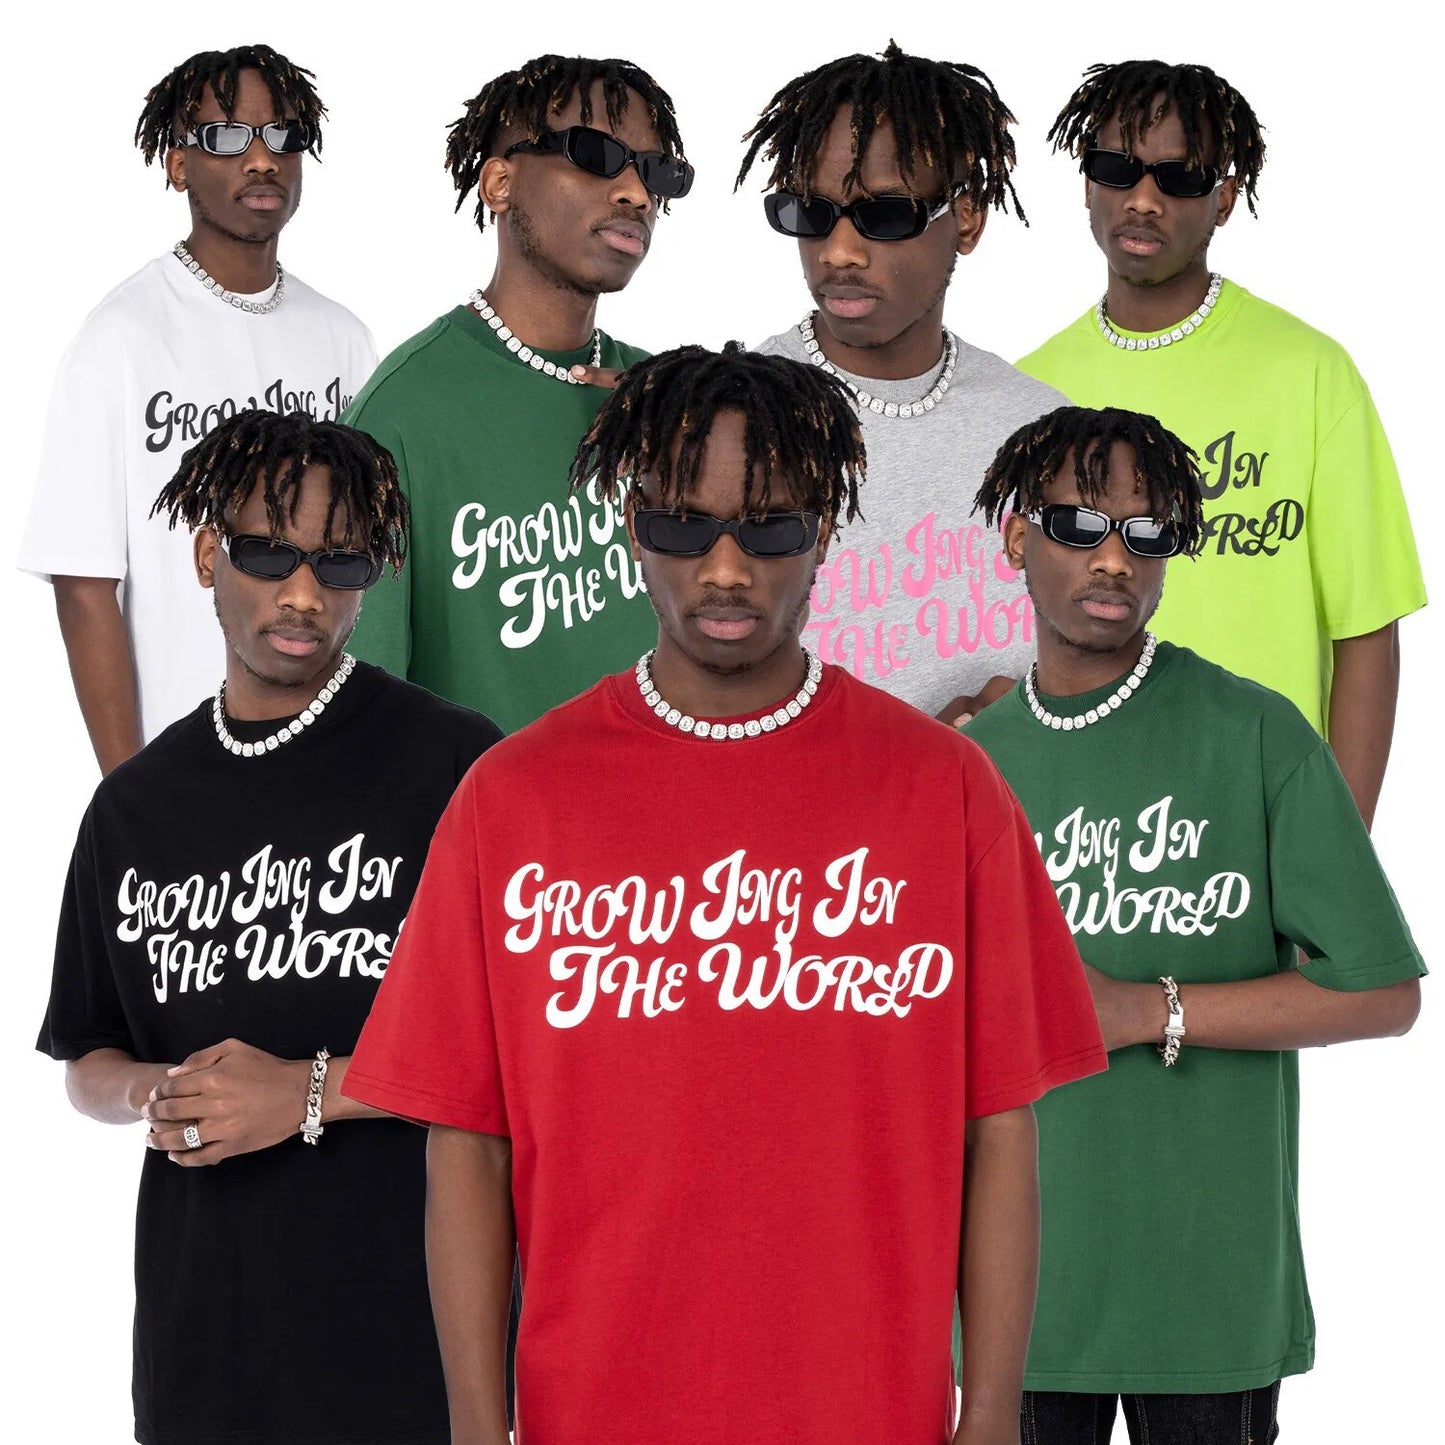 UncleDonJM "Growing In The World" Text Printed Short Sleeve T-shirt